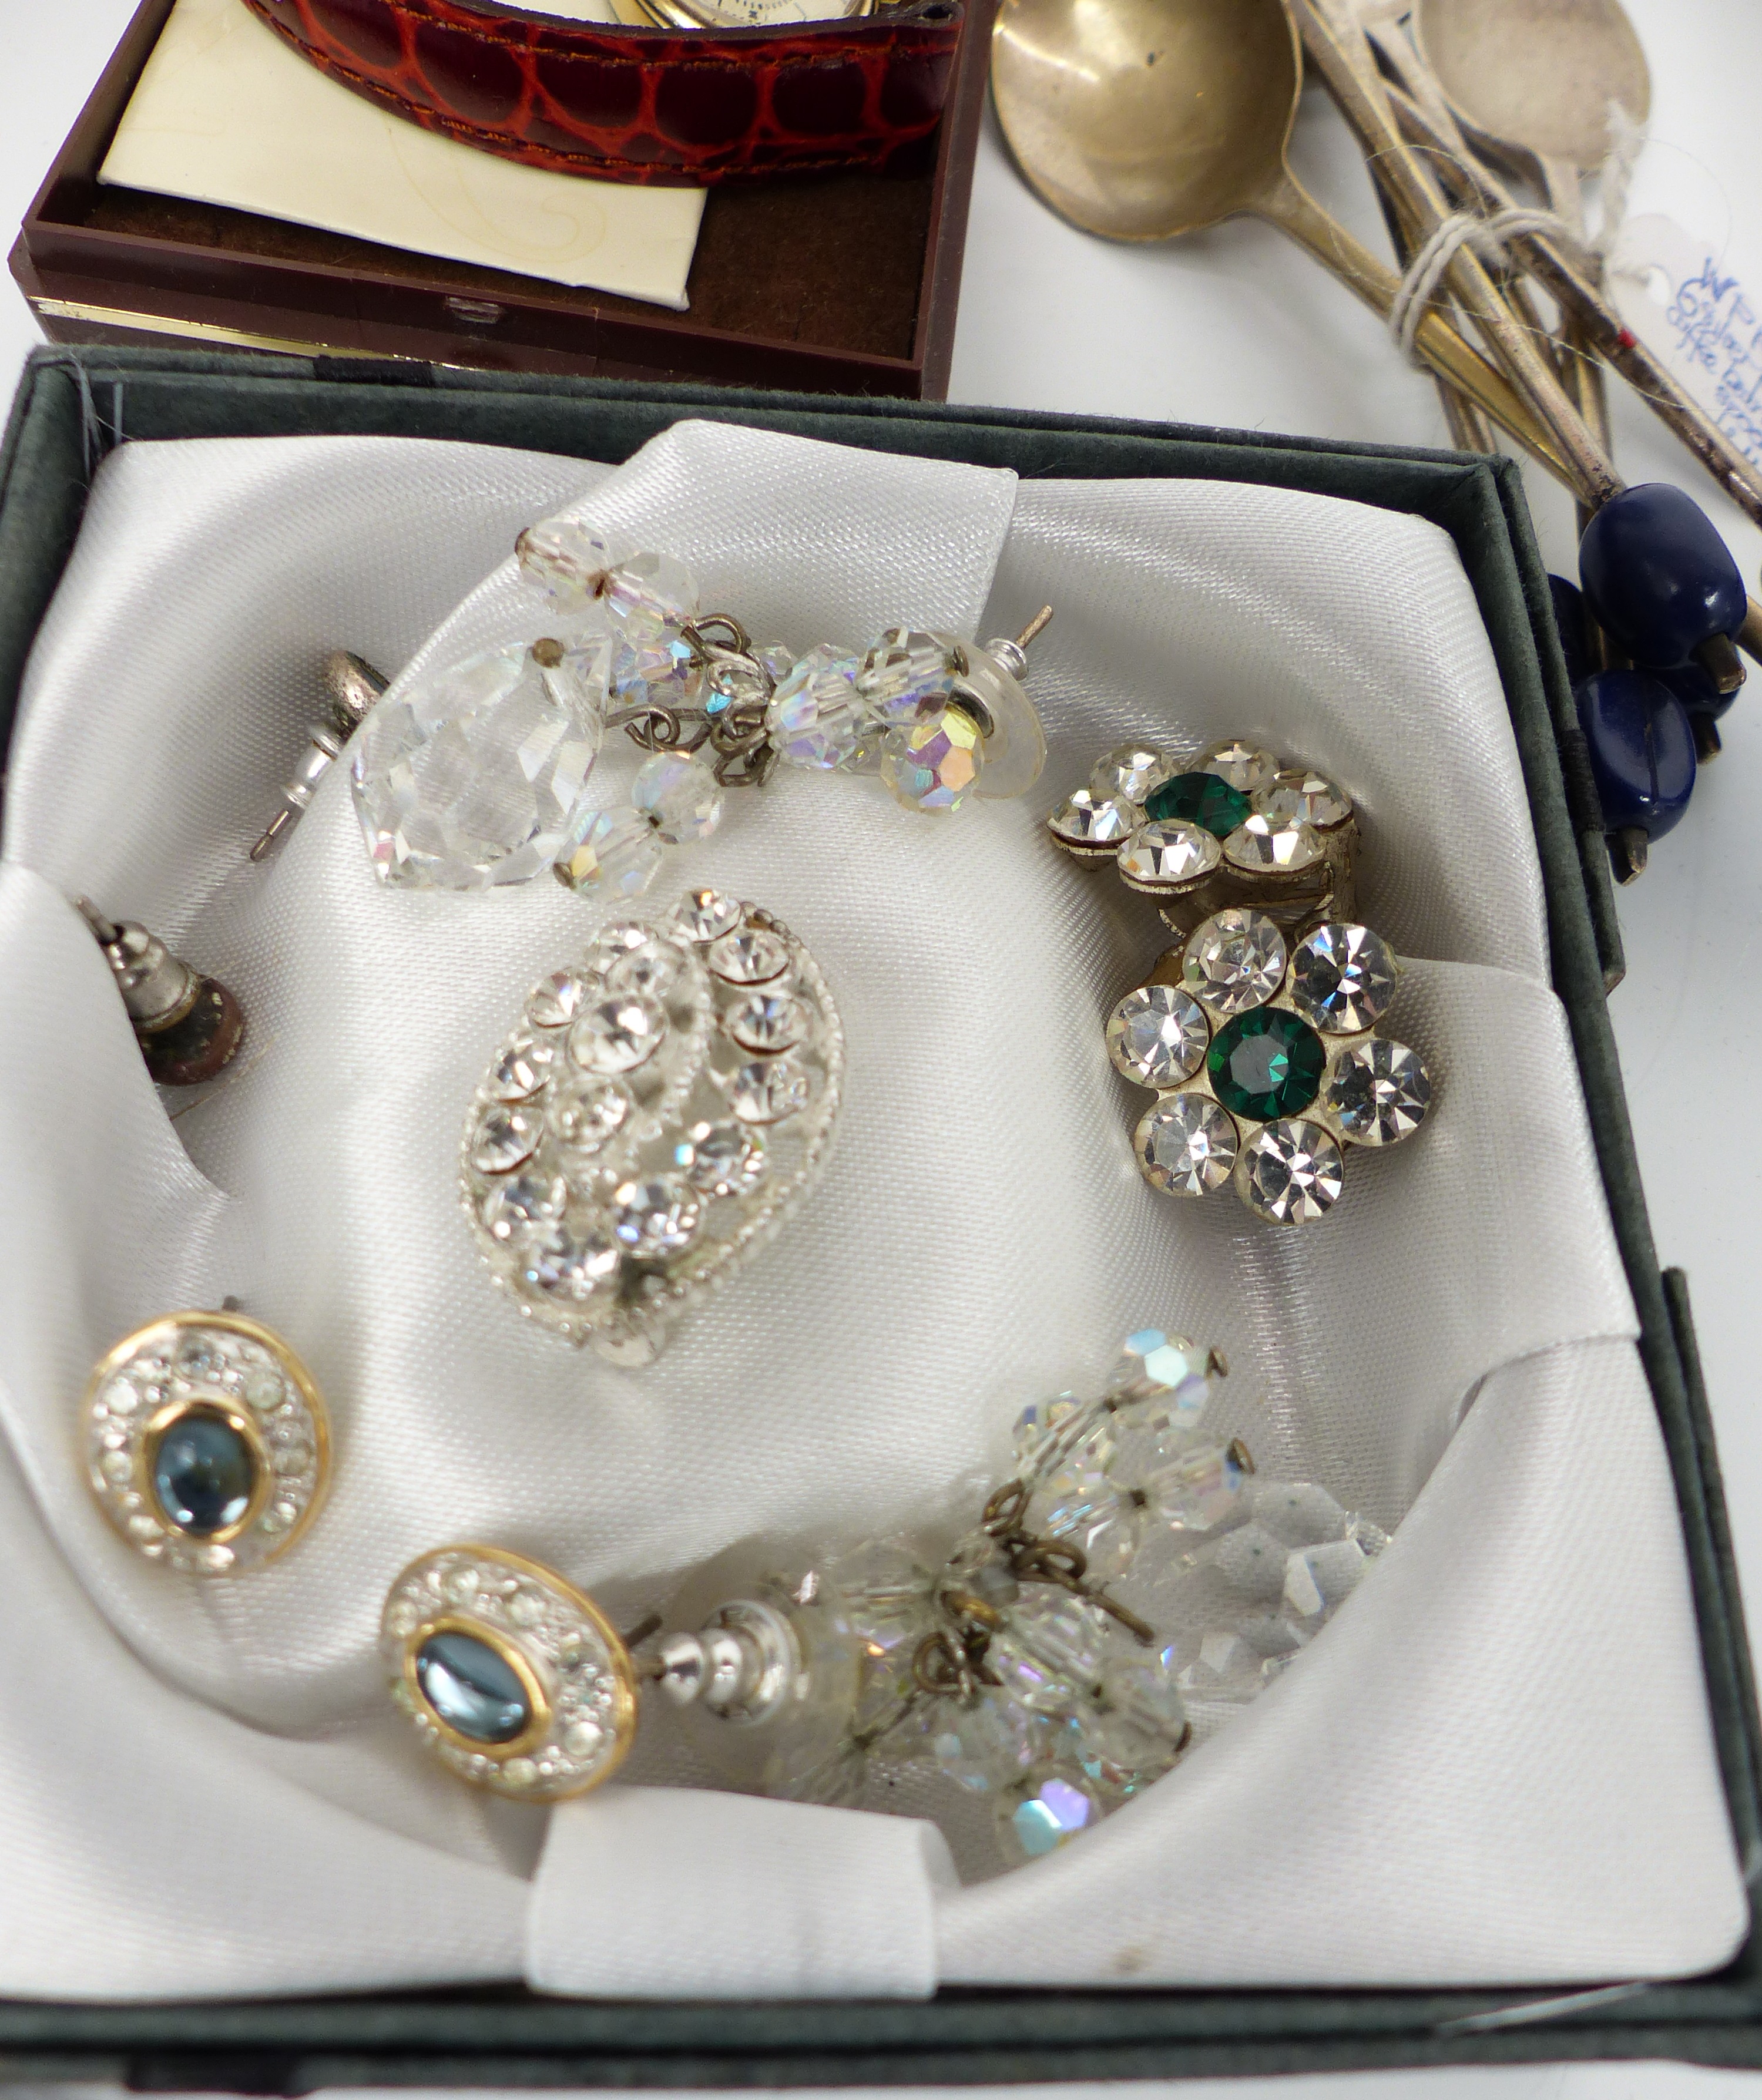 A collection of jewellery including earrings, necklaces, brooches, etc - Image 5 of 6